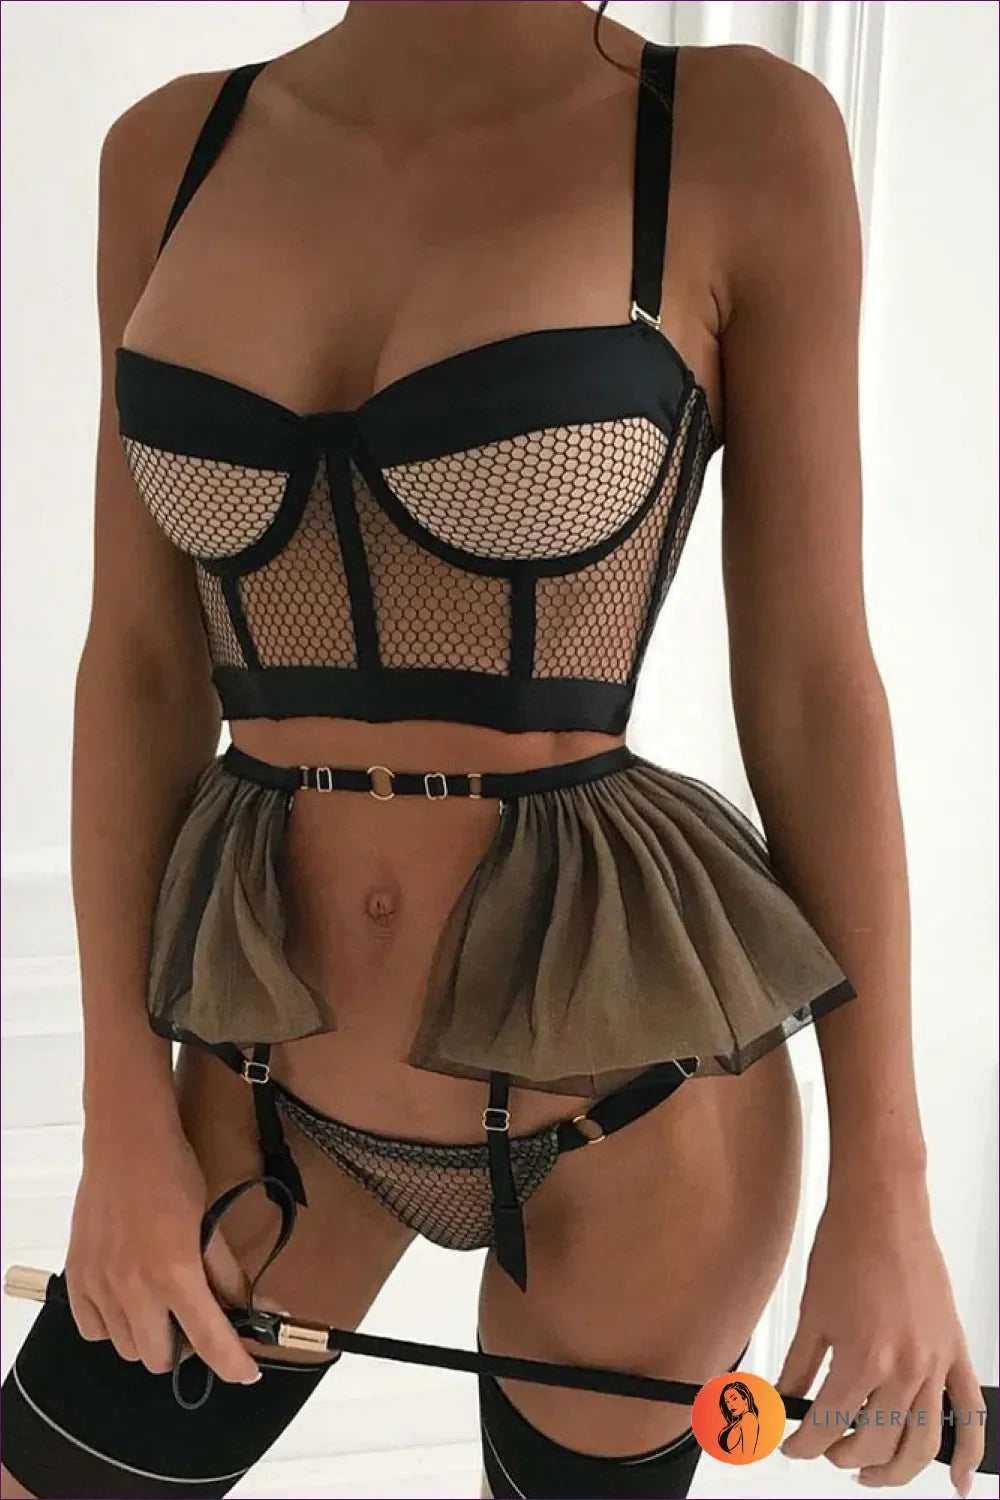 Indulge In Seductive Luxury With The Satin Sheer Ruffle Bra Set! Elevate Your Confidence And Charm This